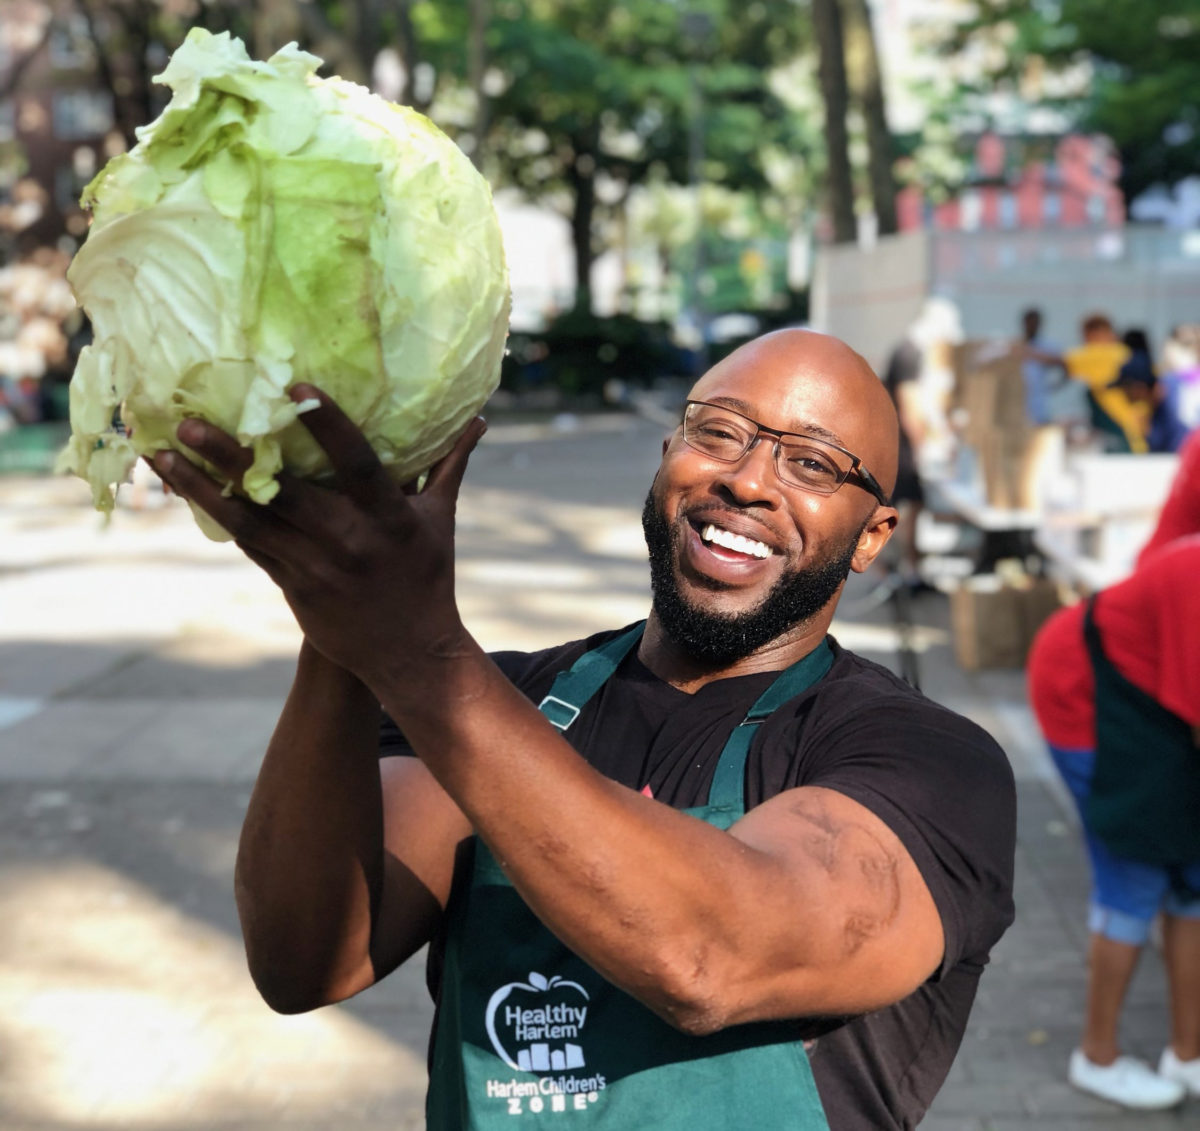 A man smiles while holding up a head of cabbage at a farmer’s market